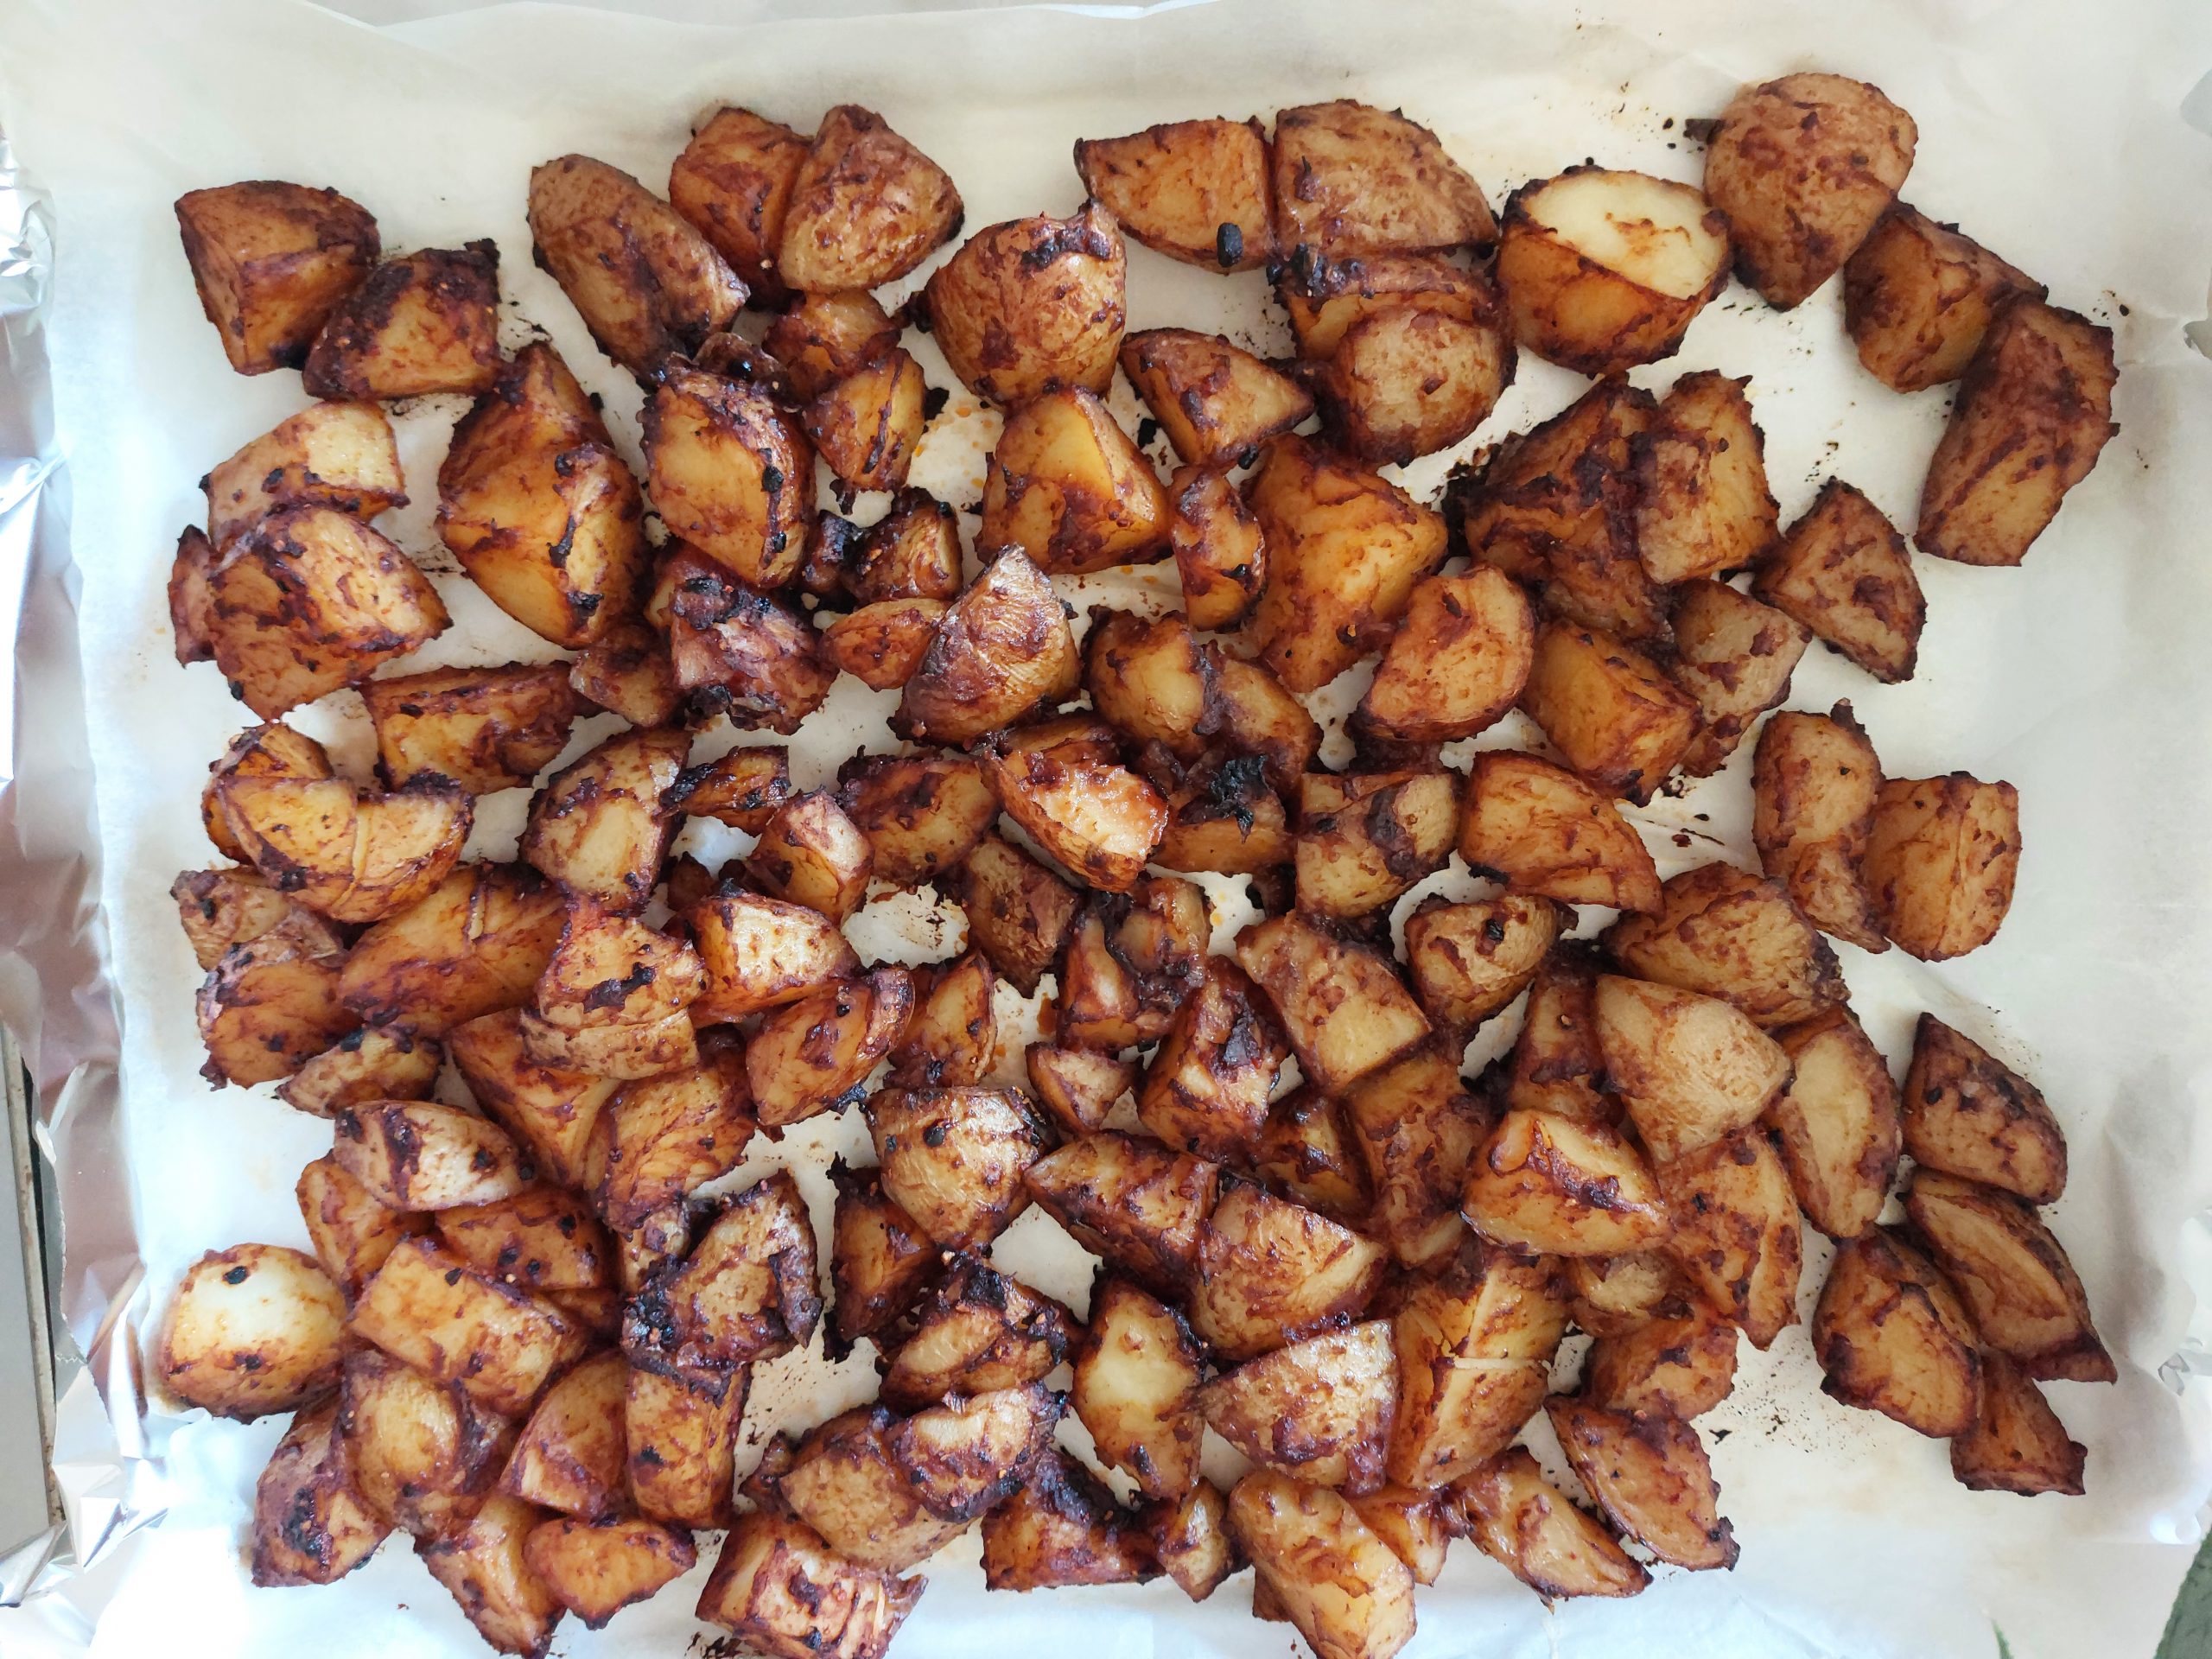 Roasted Potatoes with Sichuan Pepper and Hoisin Sauce